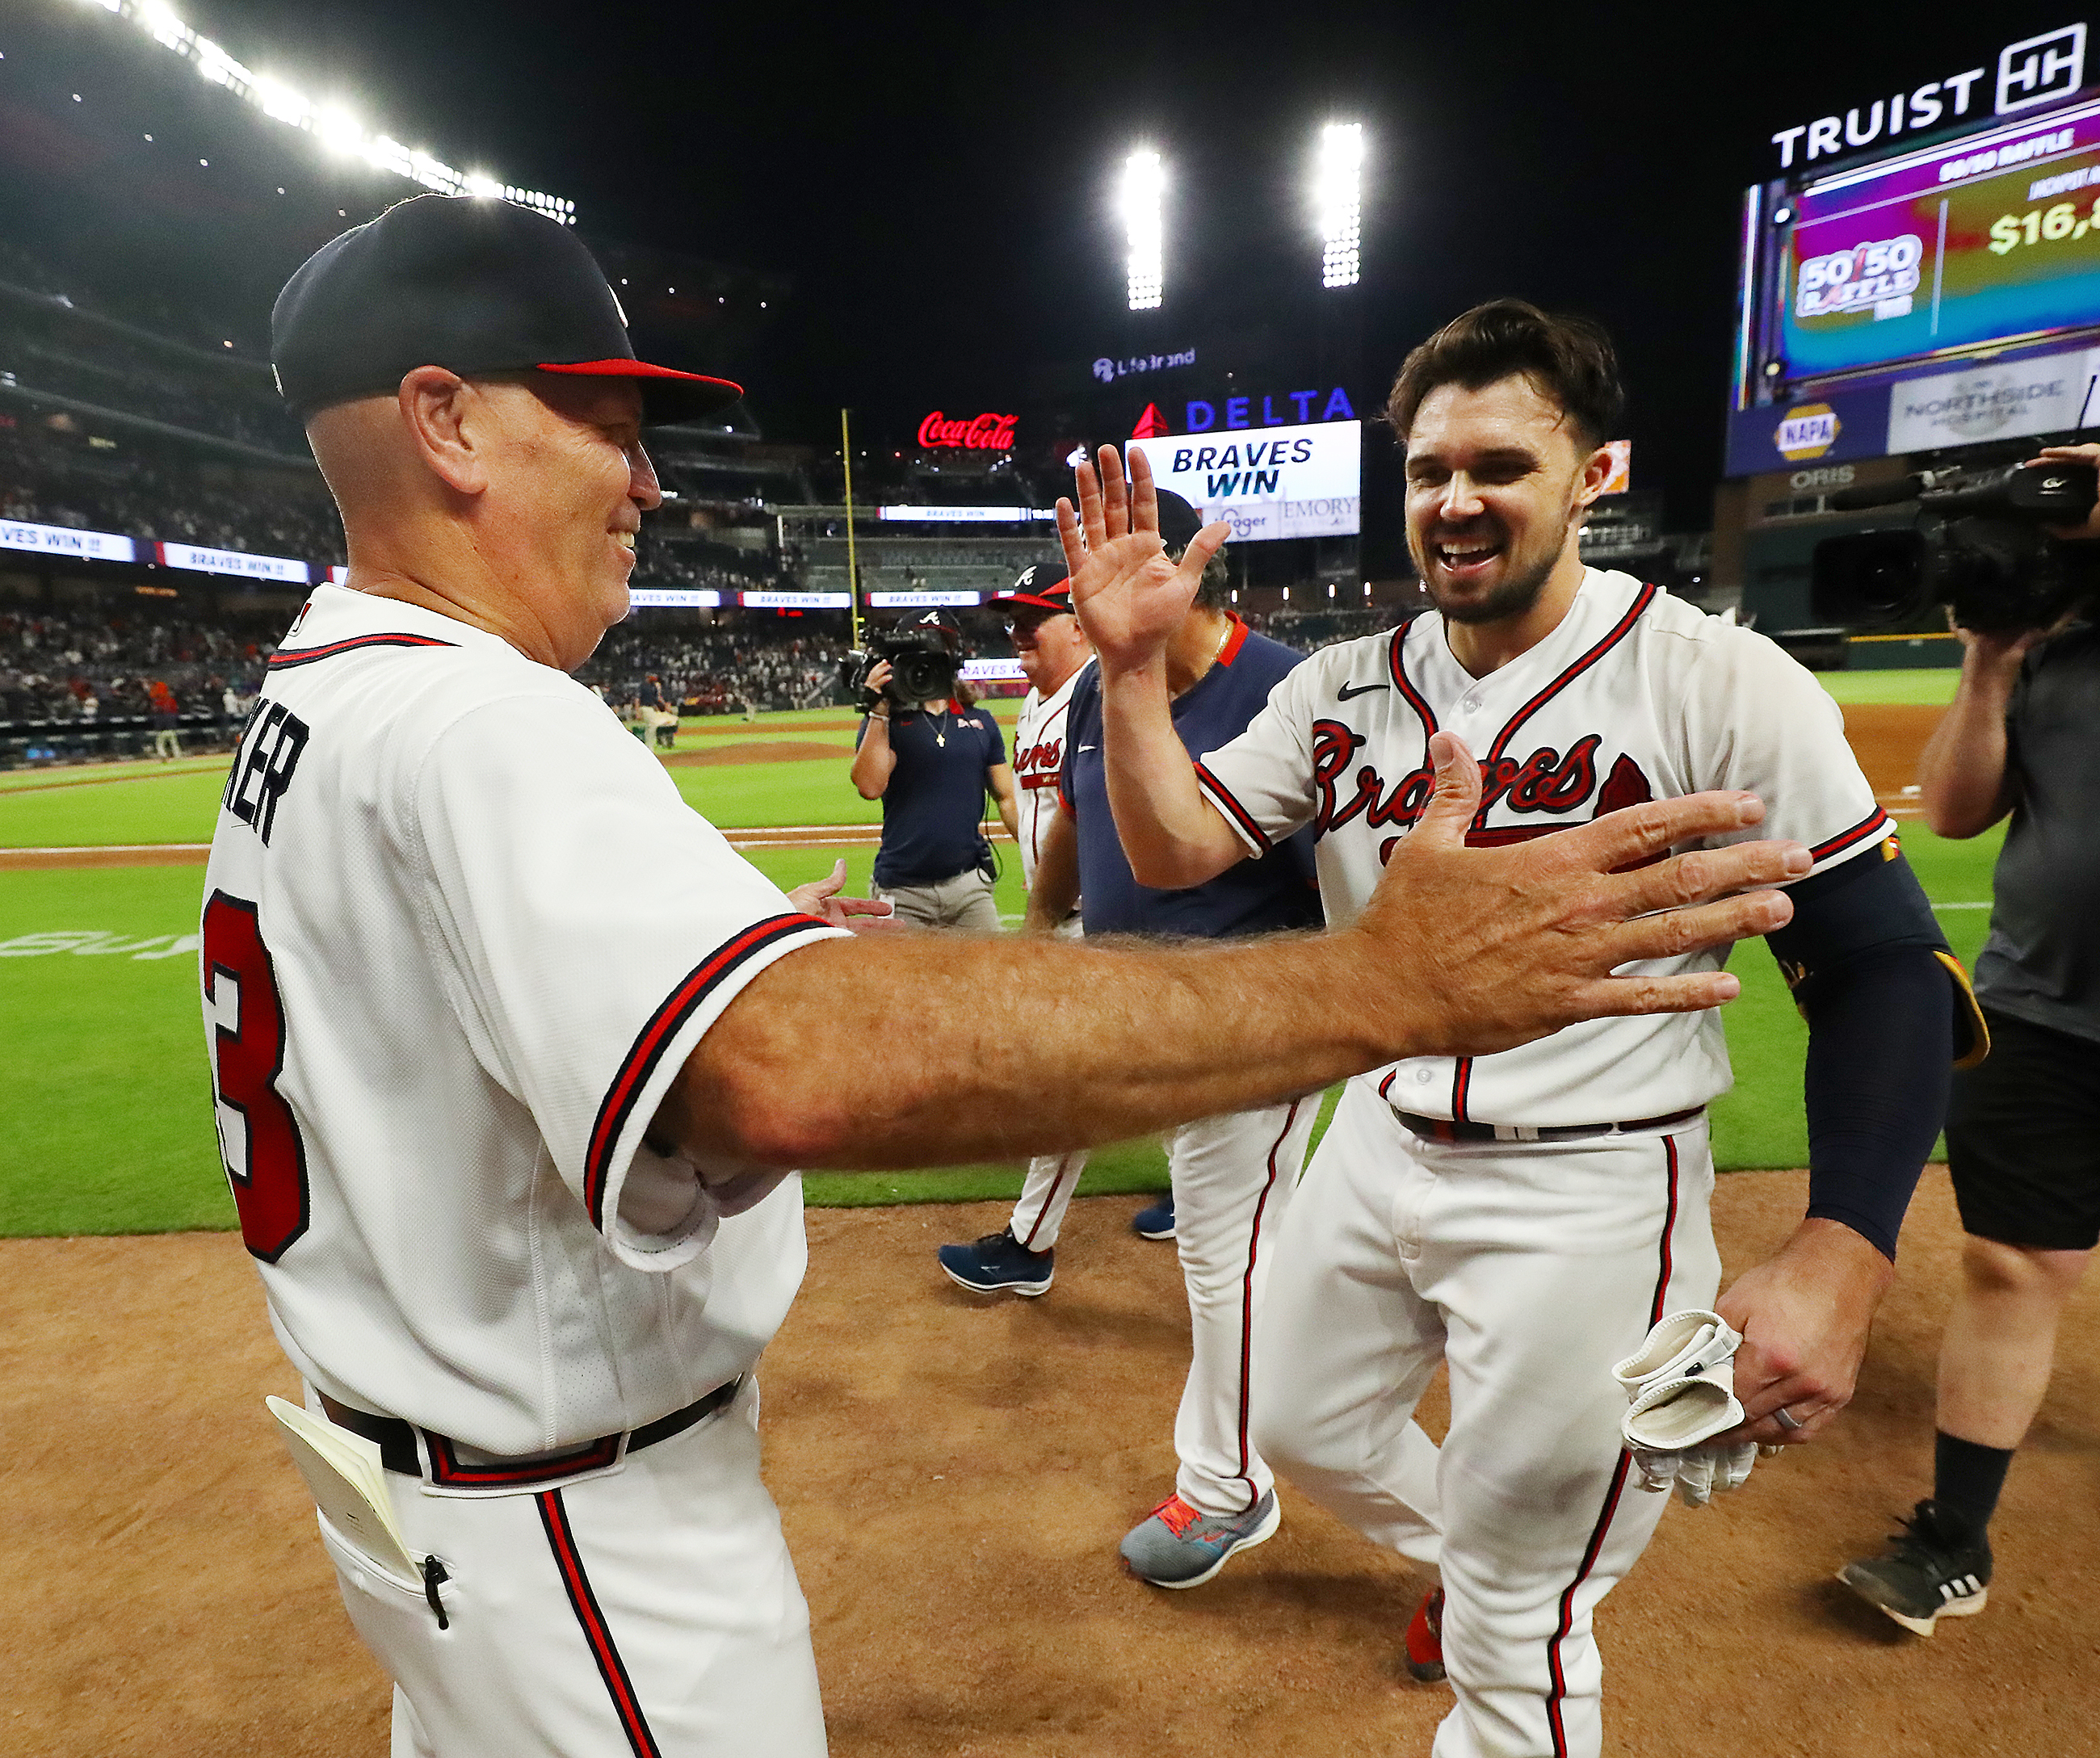 Braves score three in ninth to walk off with a win over the Giants